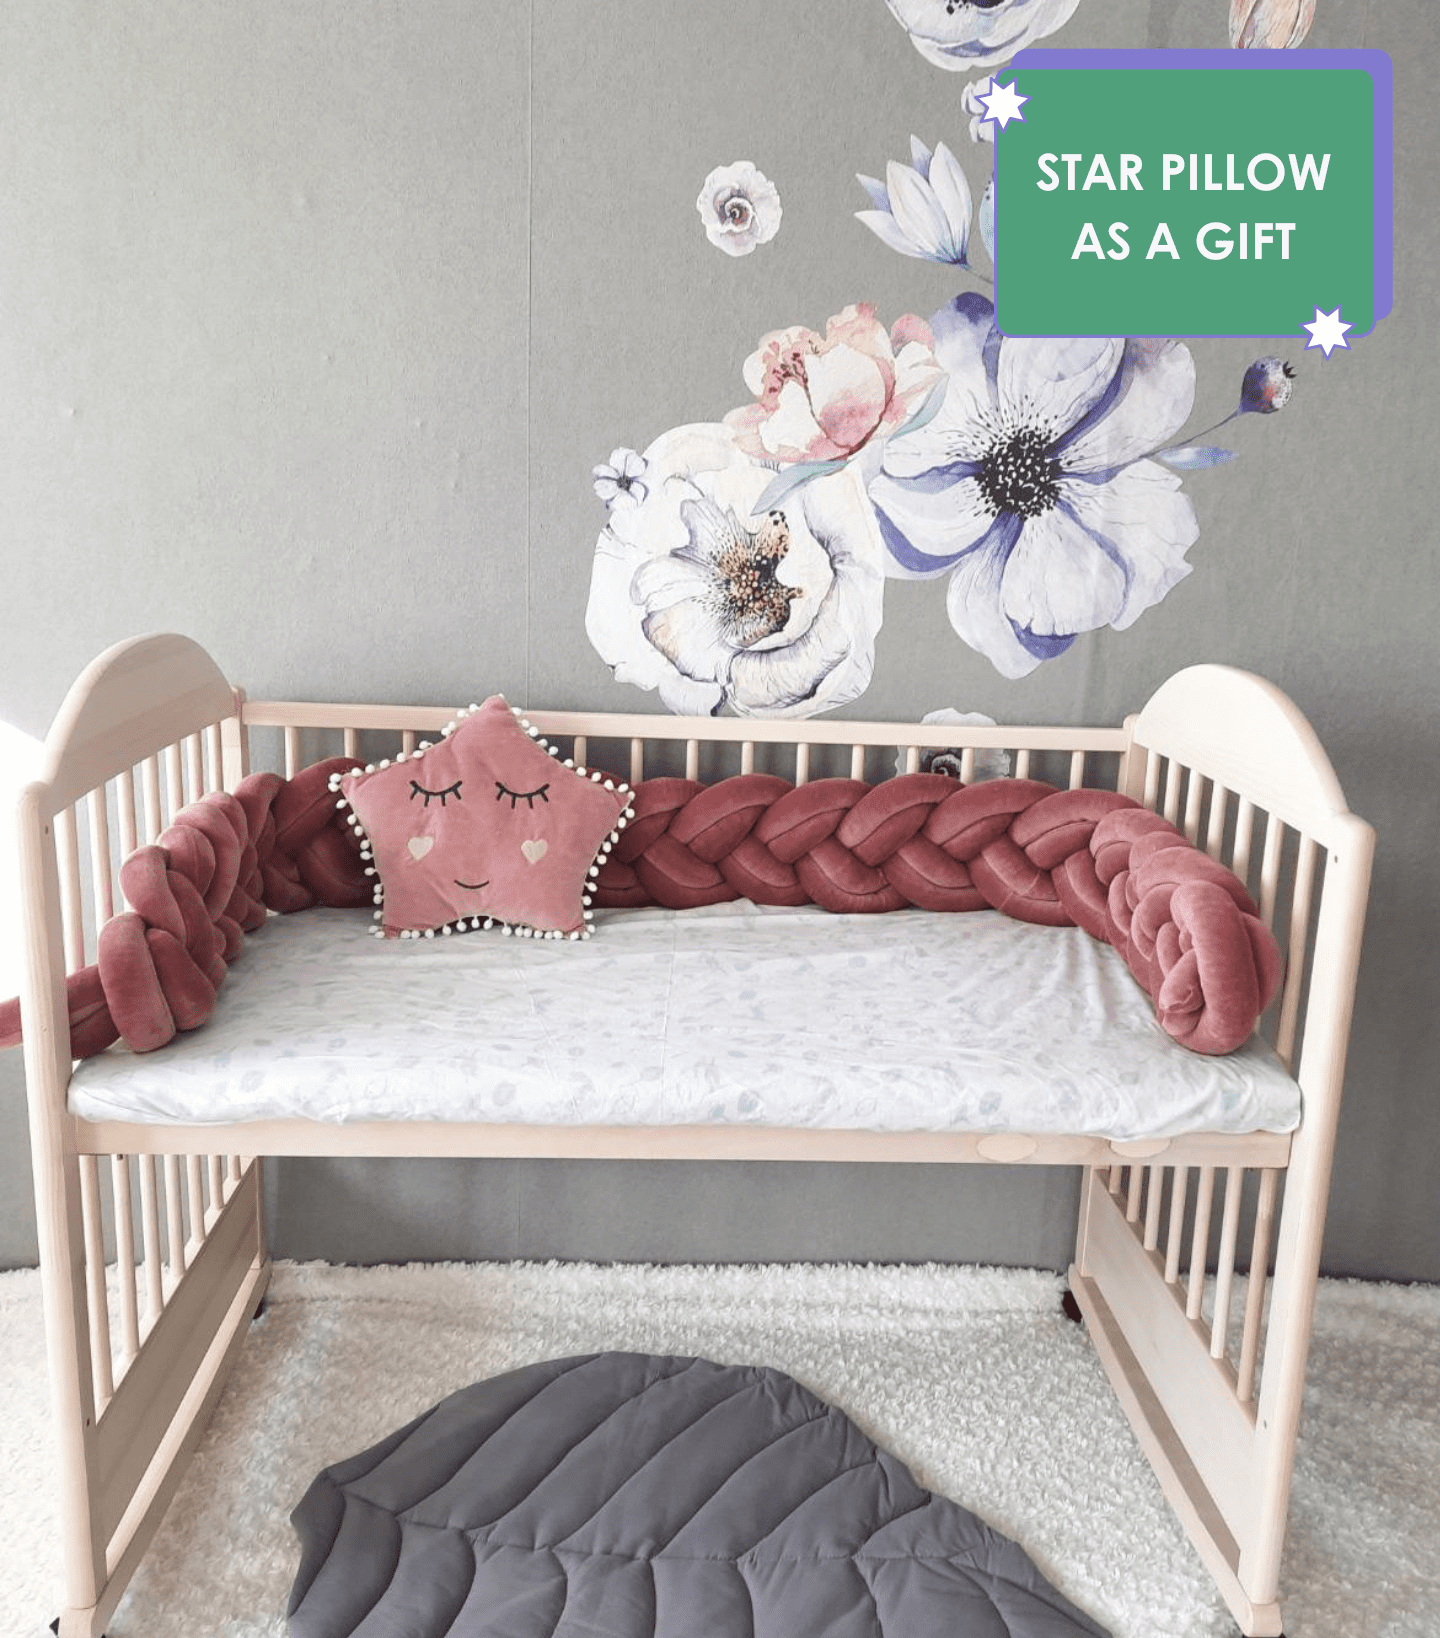 Fresia double braided crib bumpers with gold gray star pillow on the crib. Star pillow as a gift. Front side